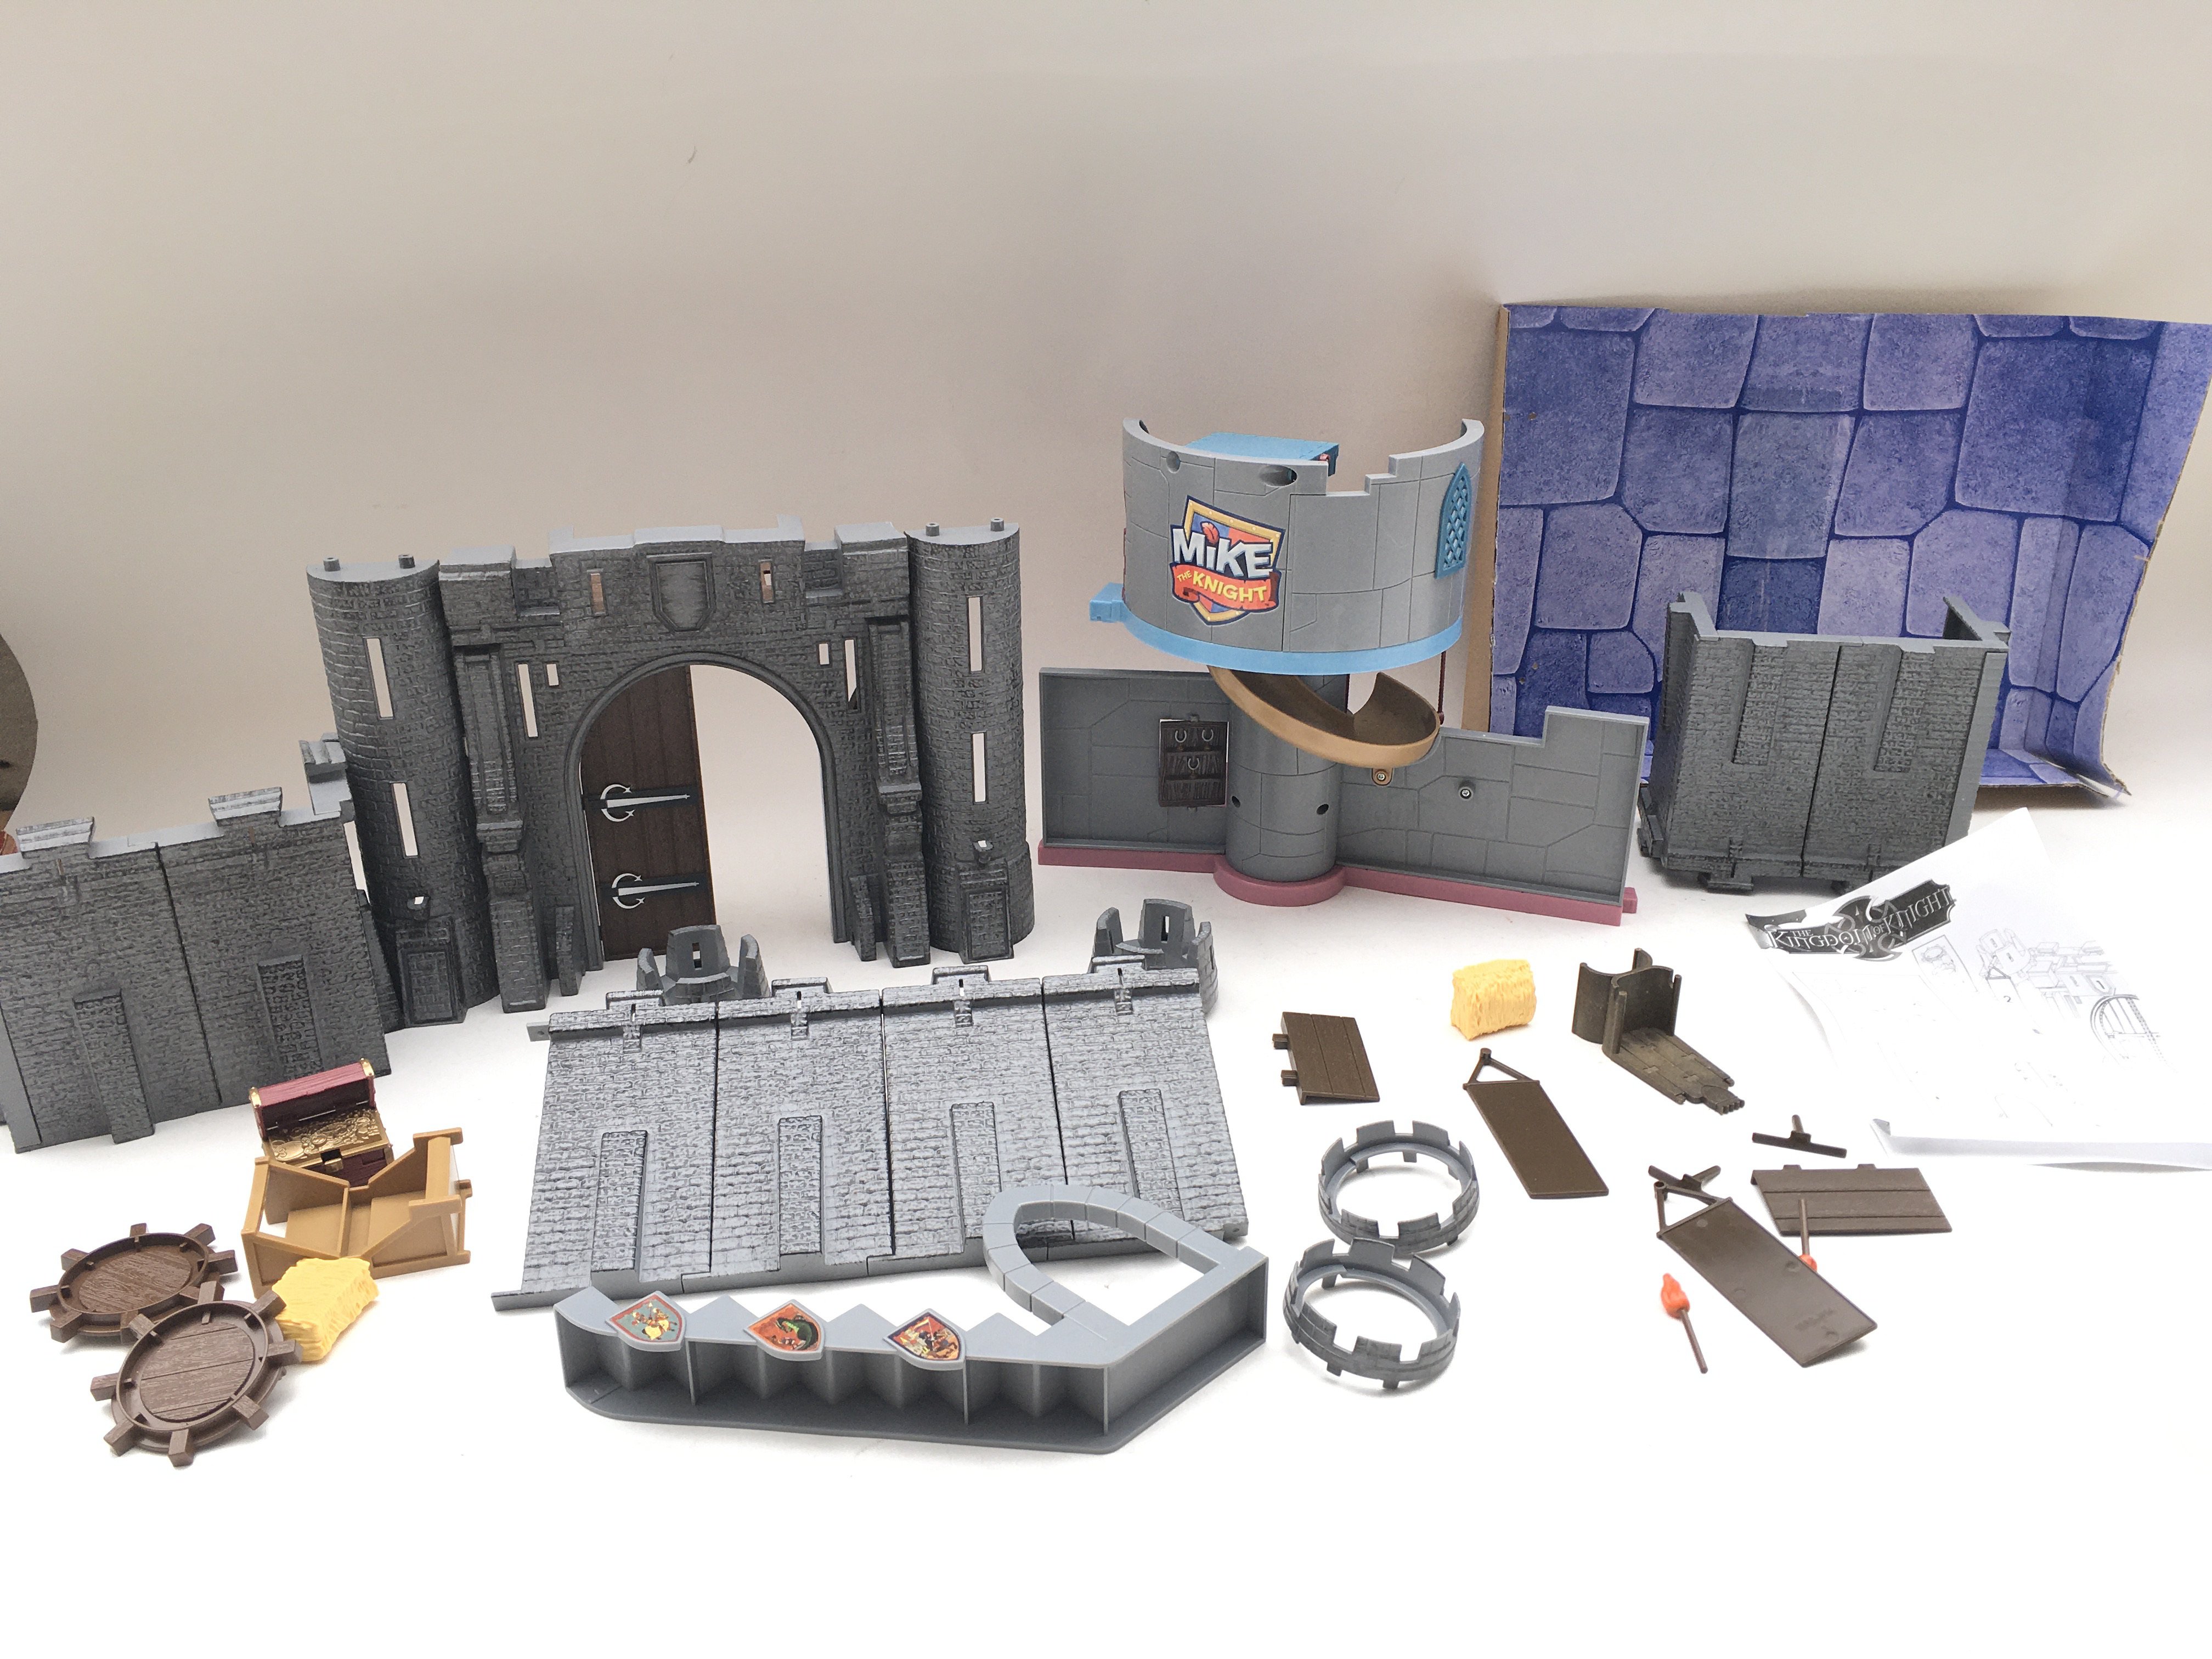 A kingdom of knight scene set and a part of mike the knight set.